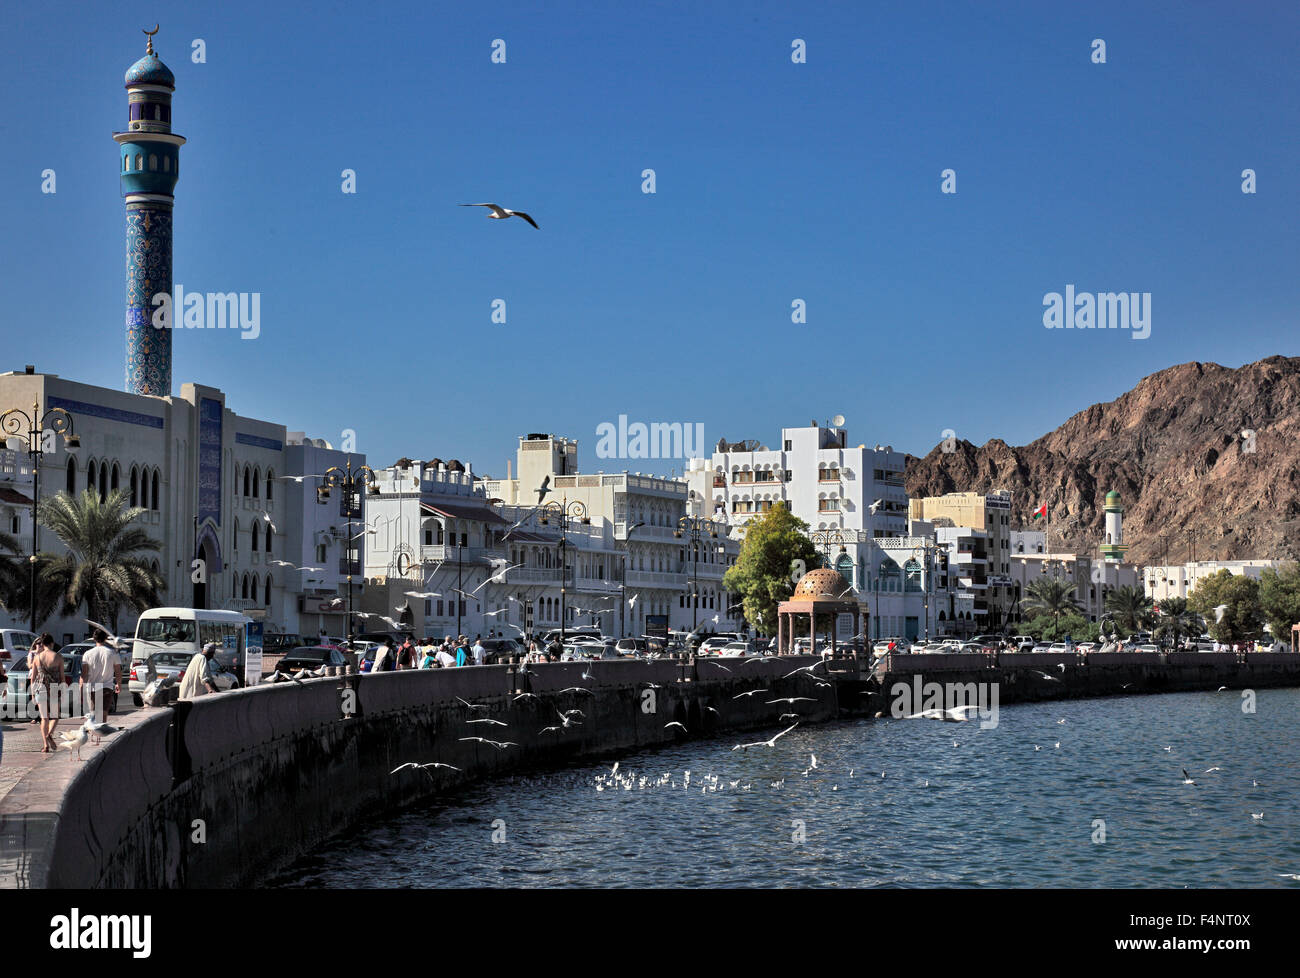 Part of town courage yard, Corniche, Muscat, Oman Stock Photo